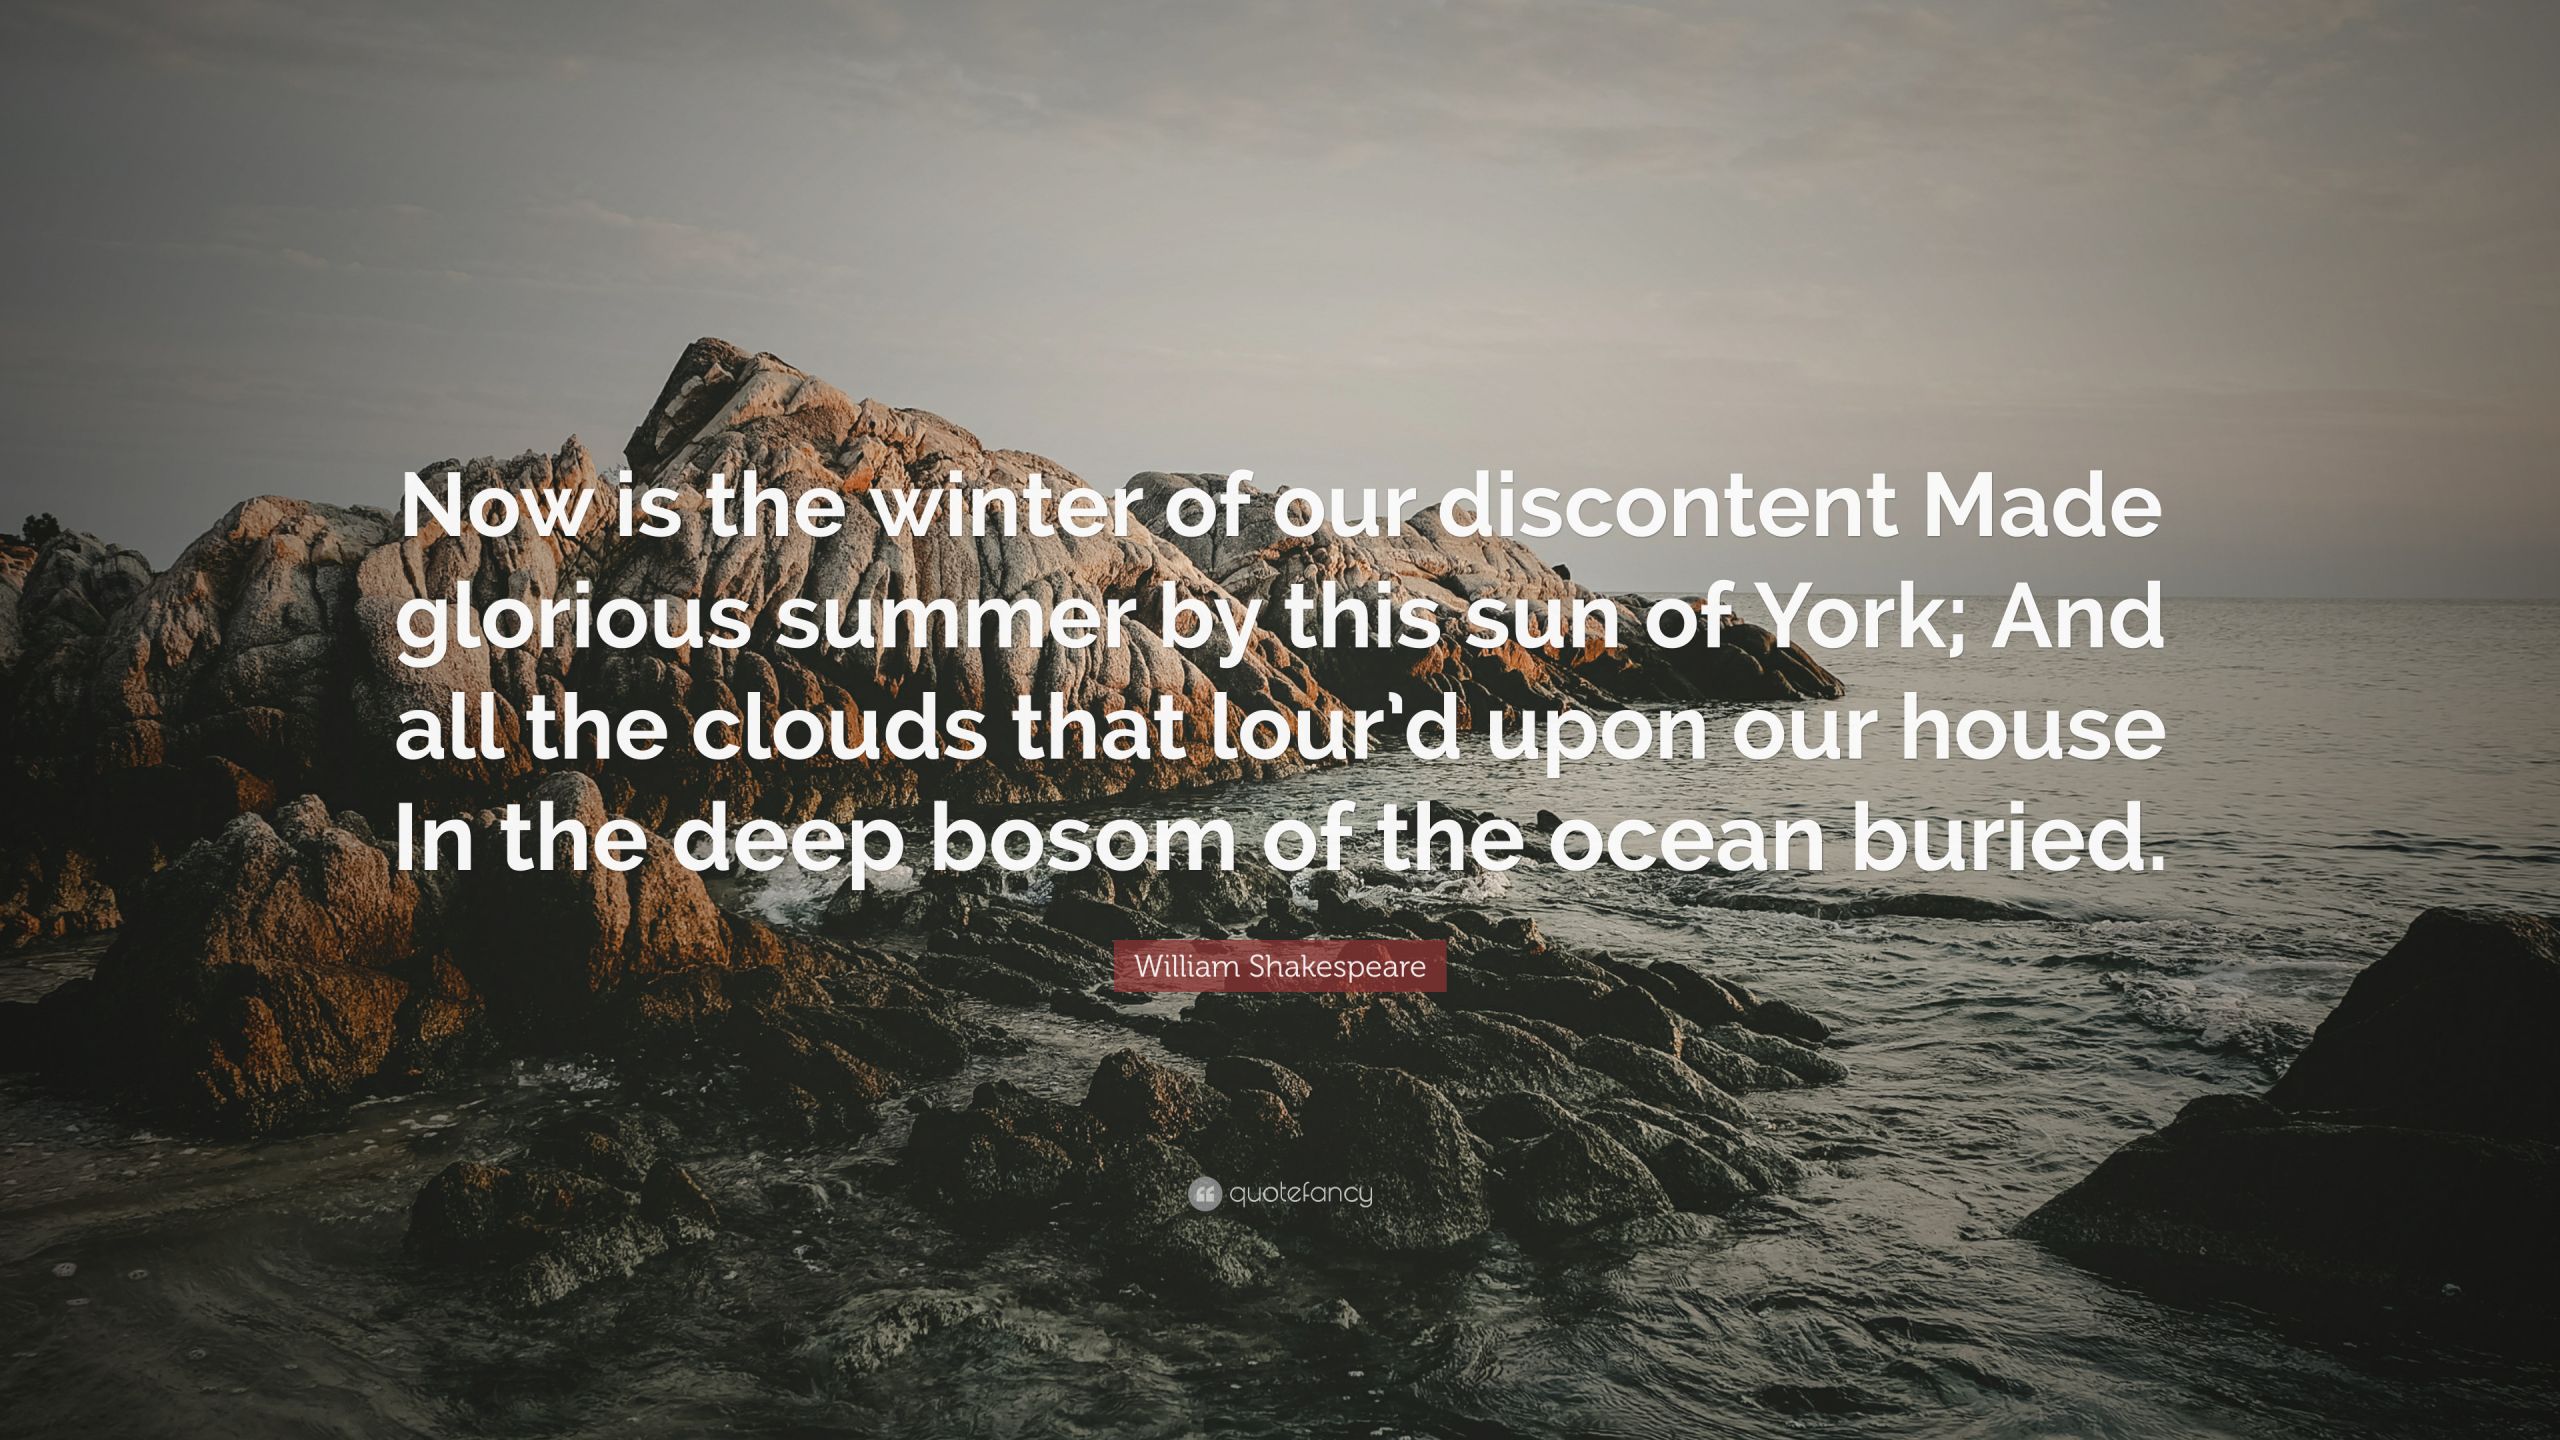 Winter Of Discontent Quote
 William Shakespeare Quote “Now is the winter of our